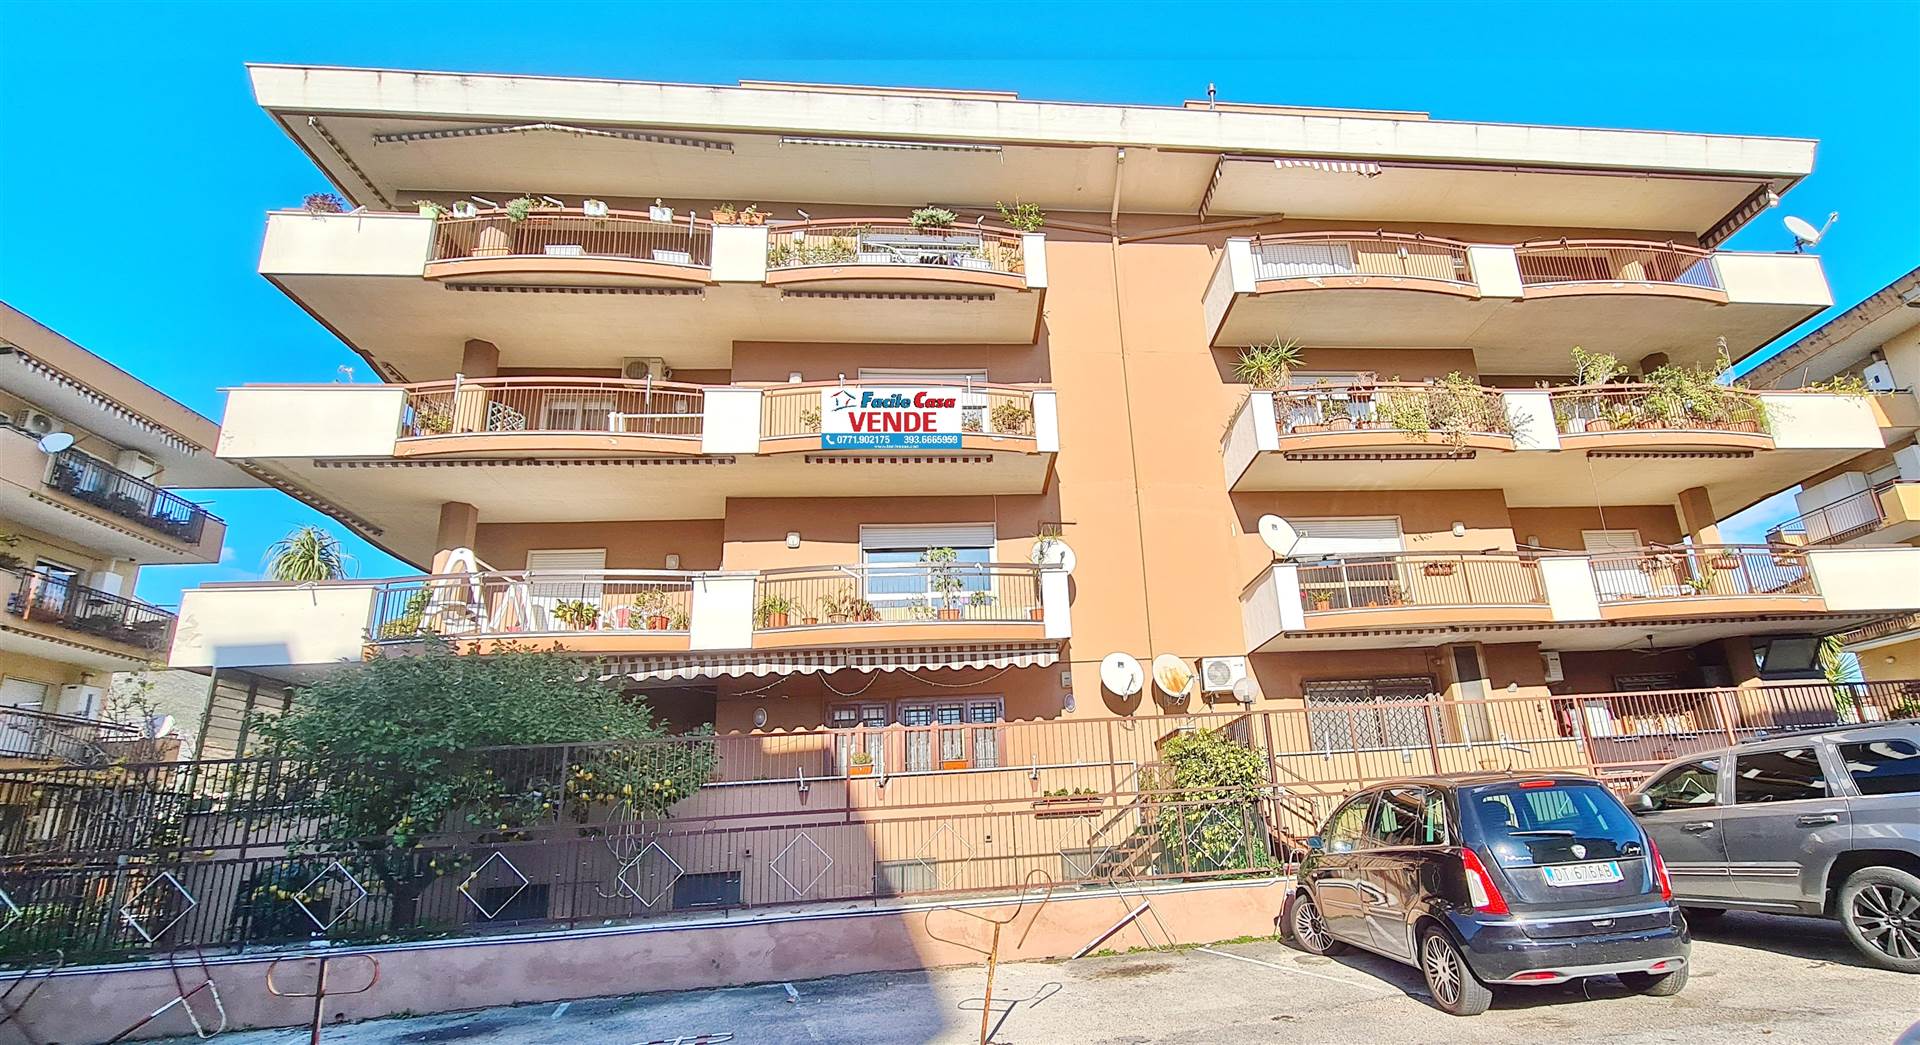 FORMIA, Apartment for sale of 140 Sq. mt., Habitable, Heating Individual heating system, Energetic class: G, placed at 2° on 4, composed by: 4 Rooms, 